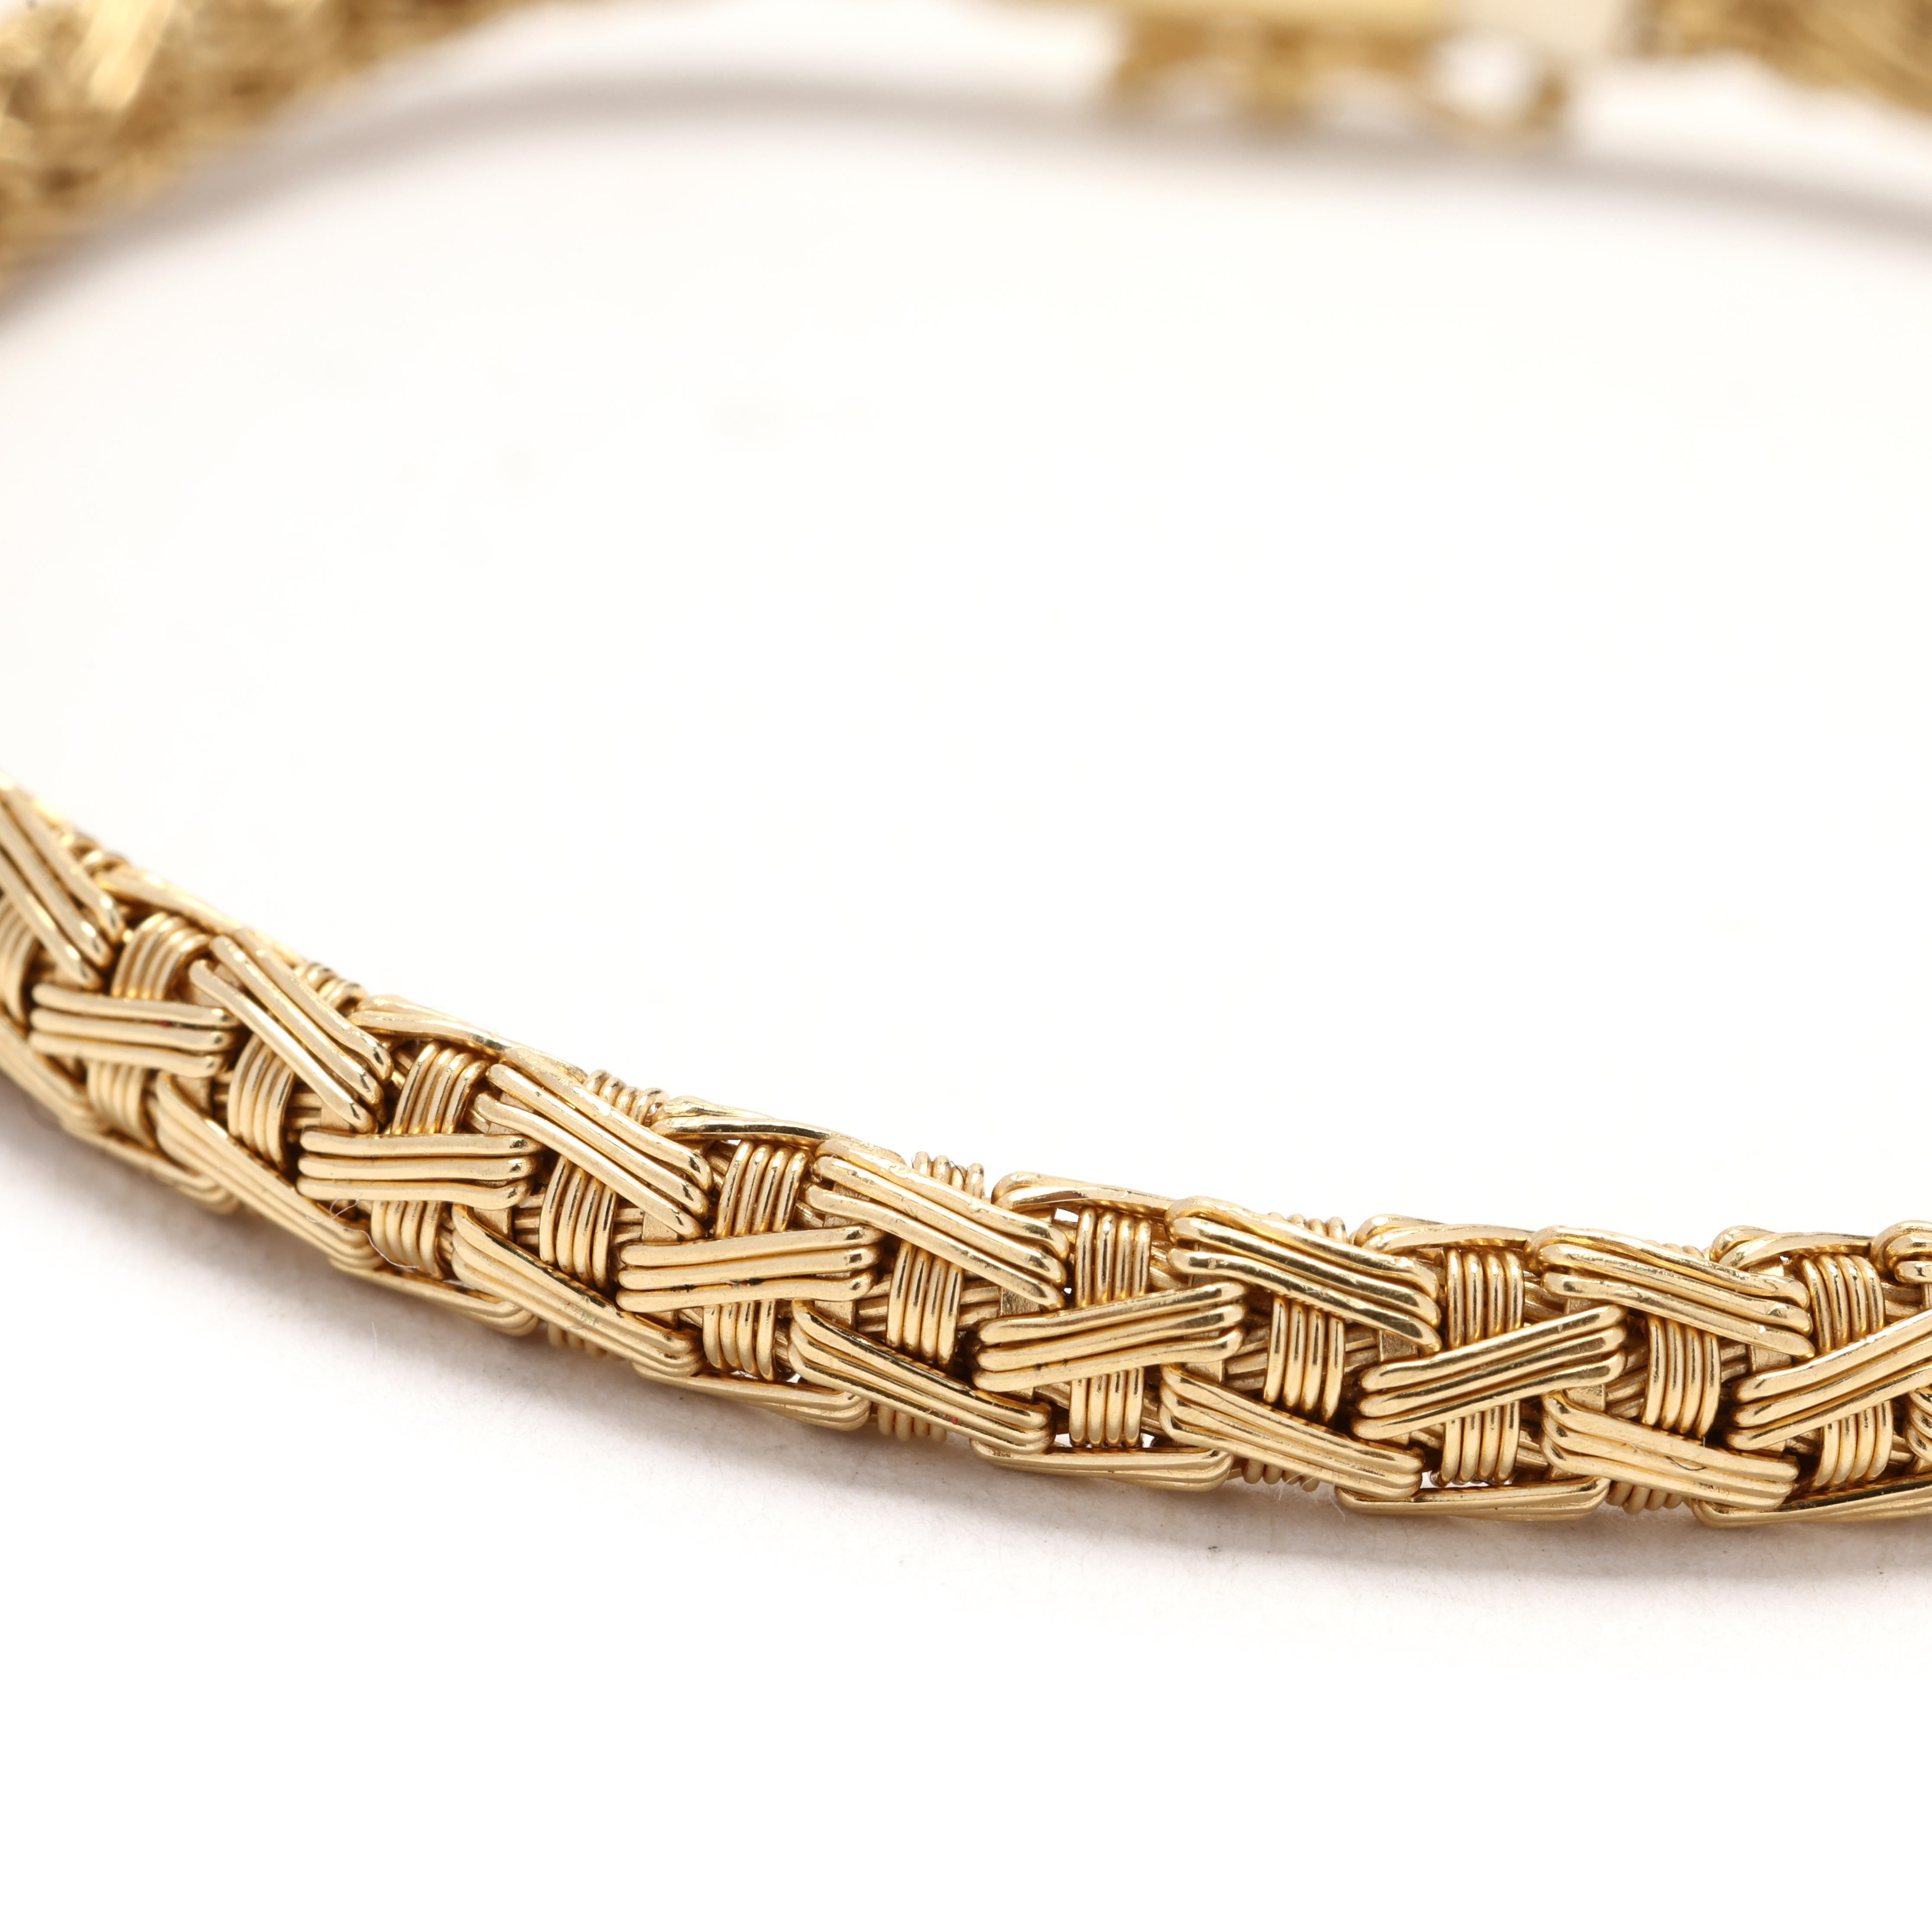 This 18k yellow gold braided bracelet is a stunning piece of jewelry that is perfect for stackable bracelets or can be worn on its own for a chic and sophisticated look. Crafted in 18k yellow gold, this bracelet features a braided design that adds a